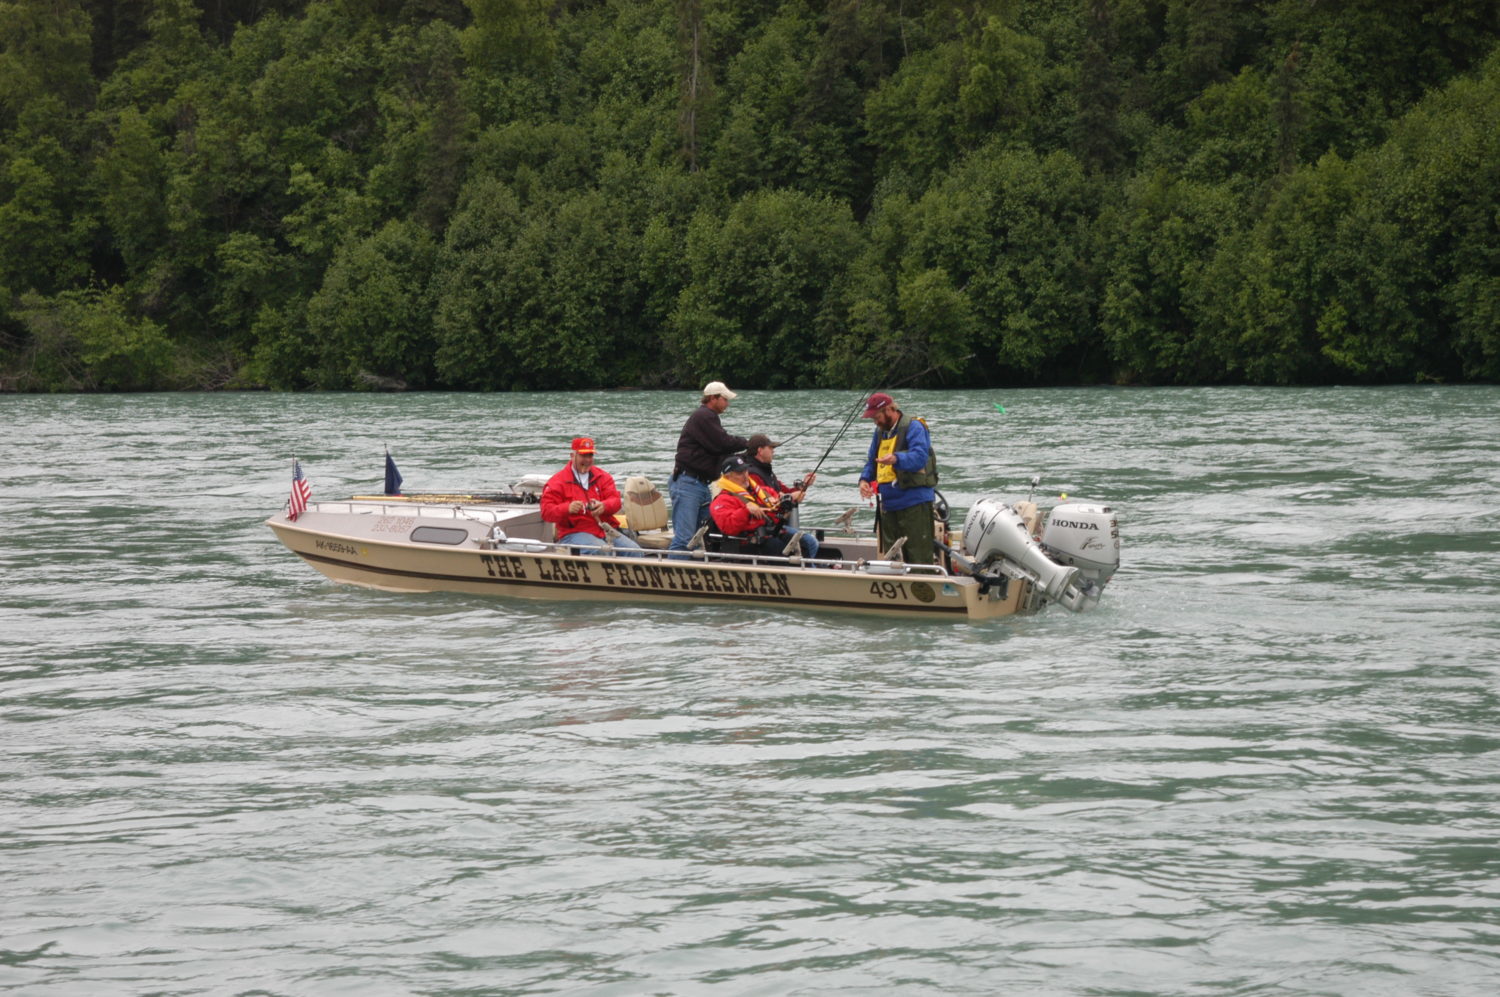 Kenai River Fishing guides specializes in barrier free access to the Alaskan outdoors